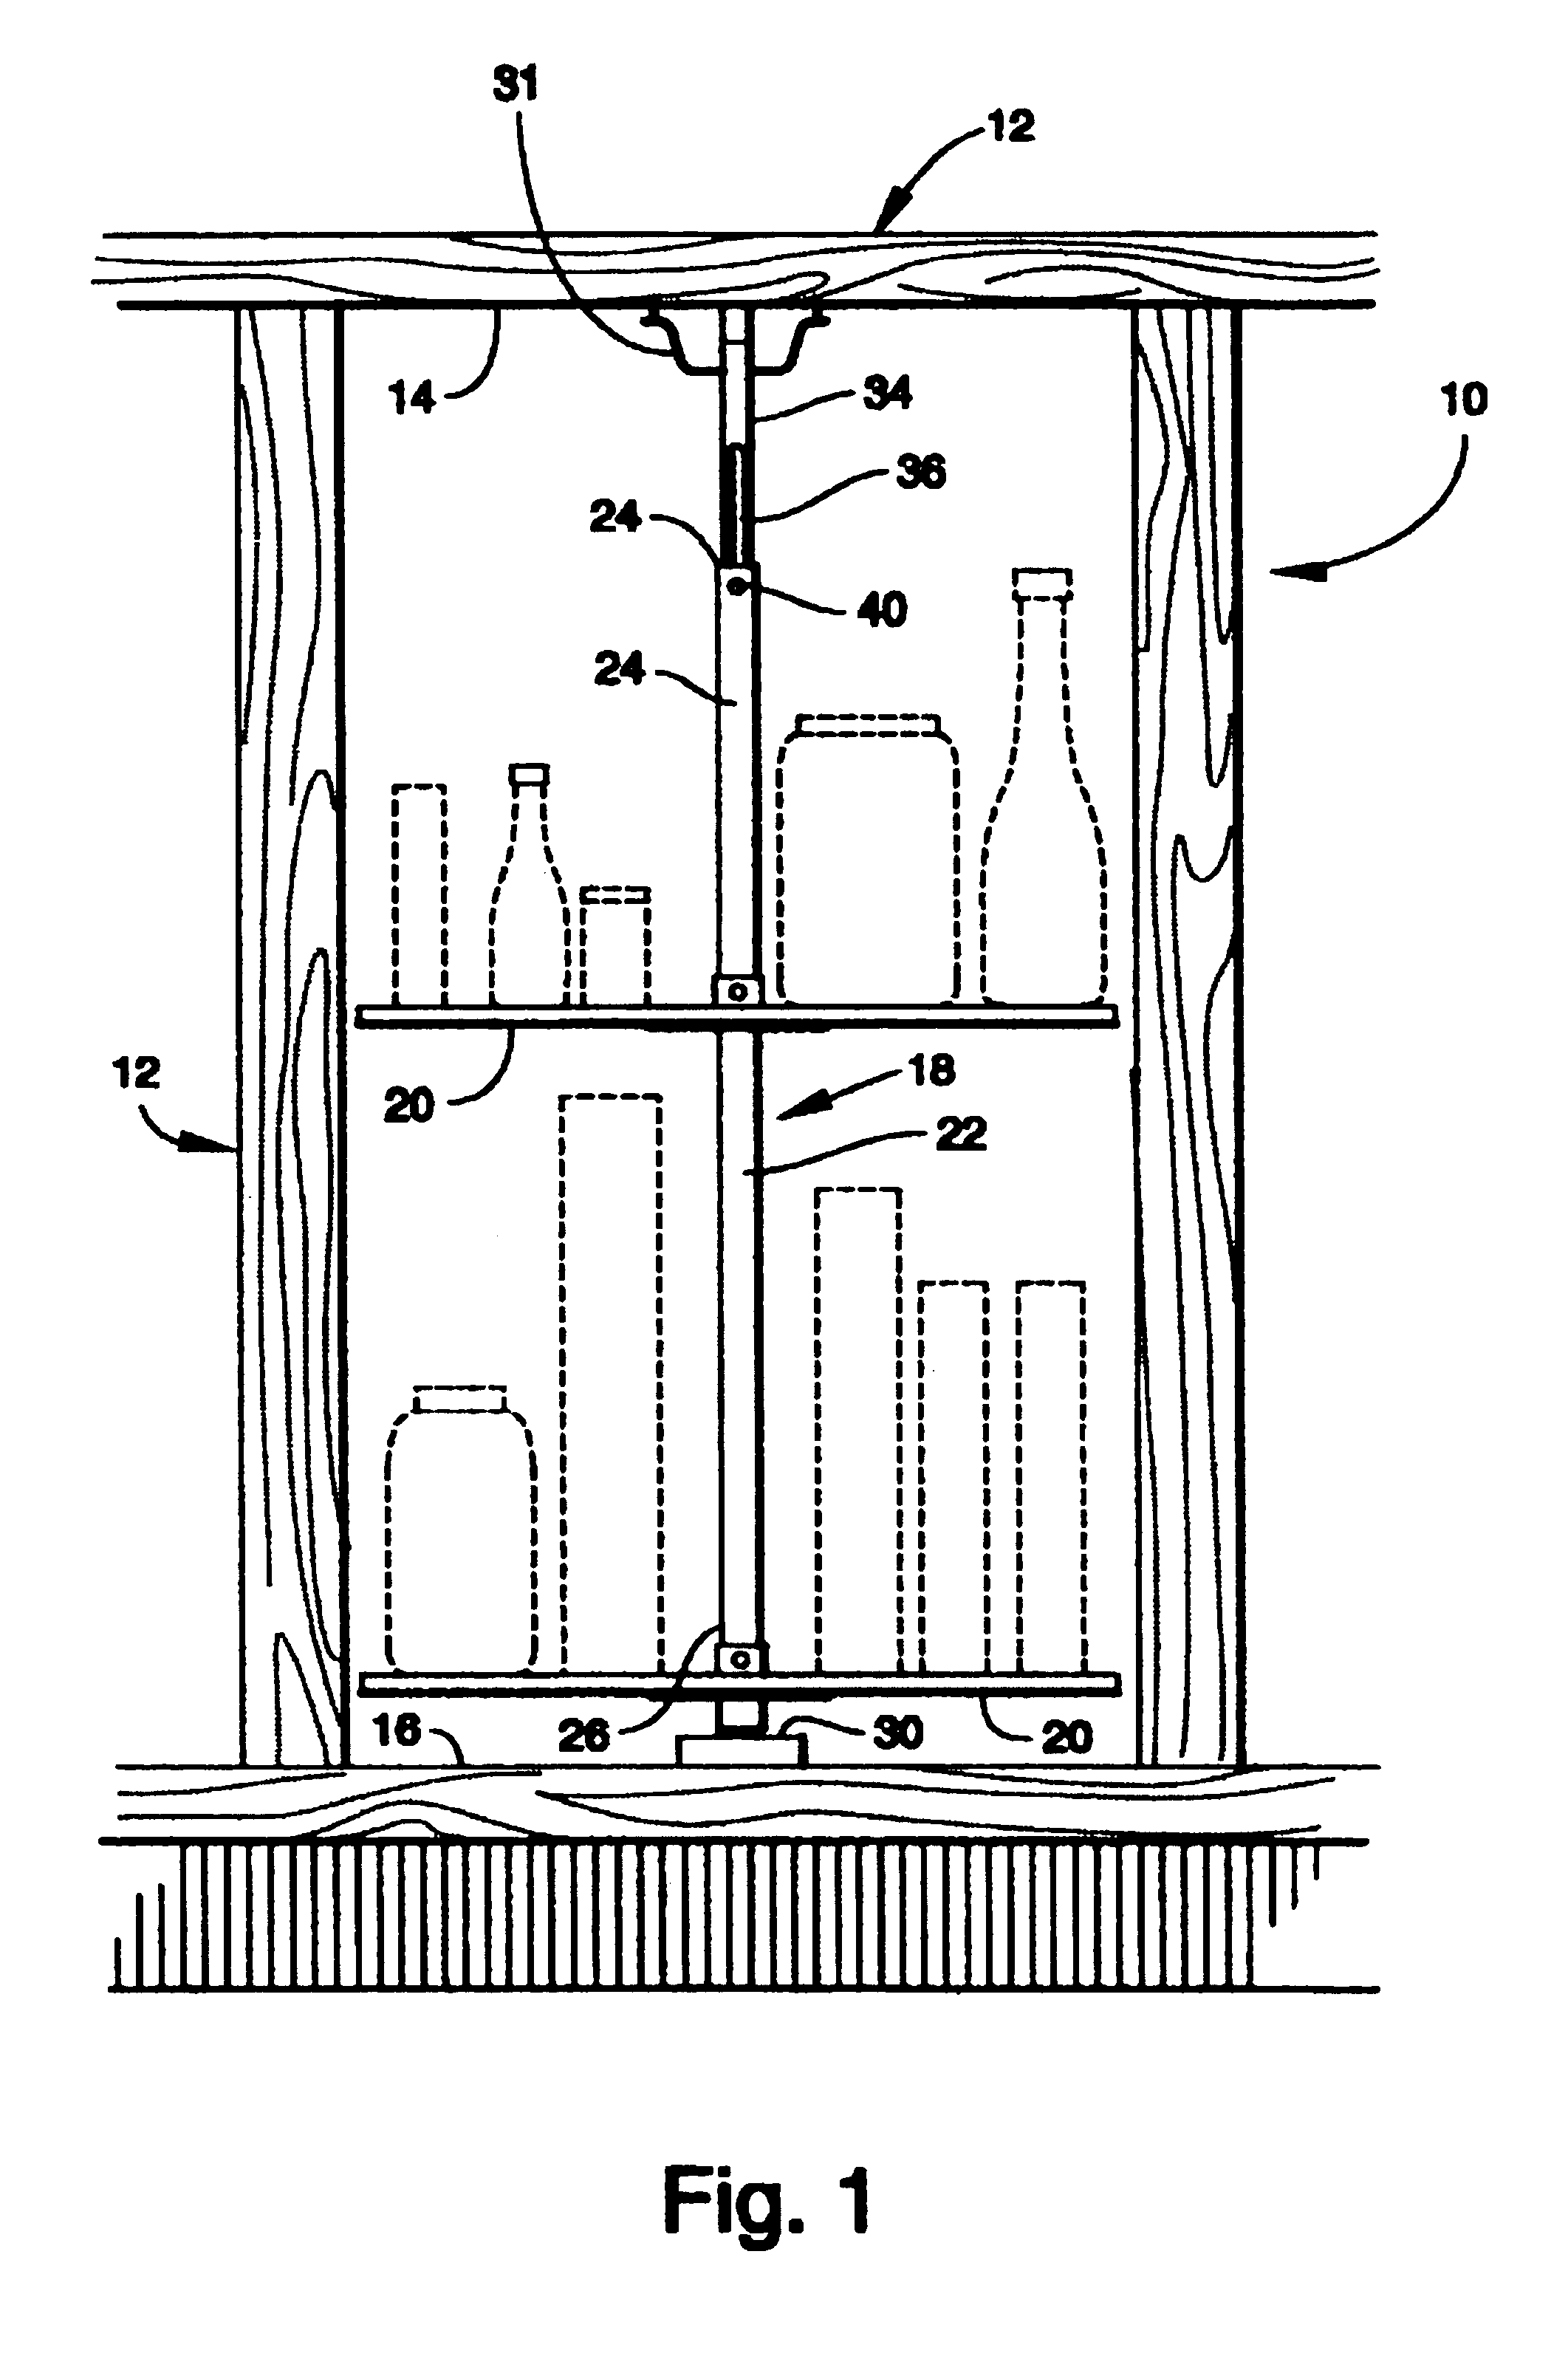 Rotary shelf assembly mechanism having a post height adjustment device and a novel shelf construction and self retaining element for securing the shelves to the post